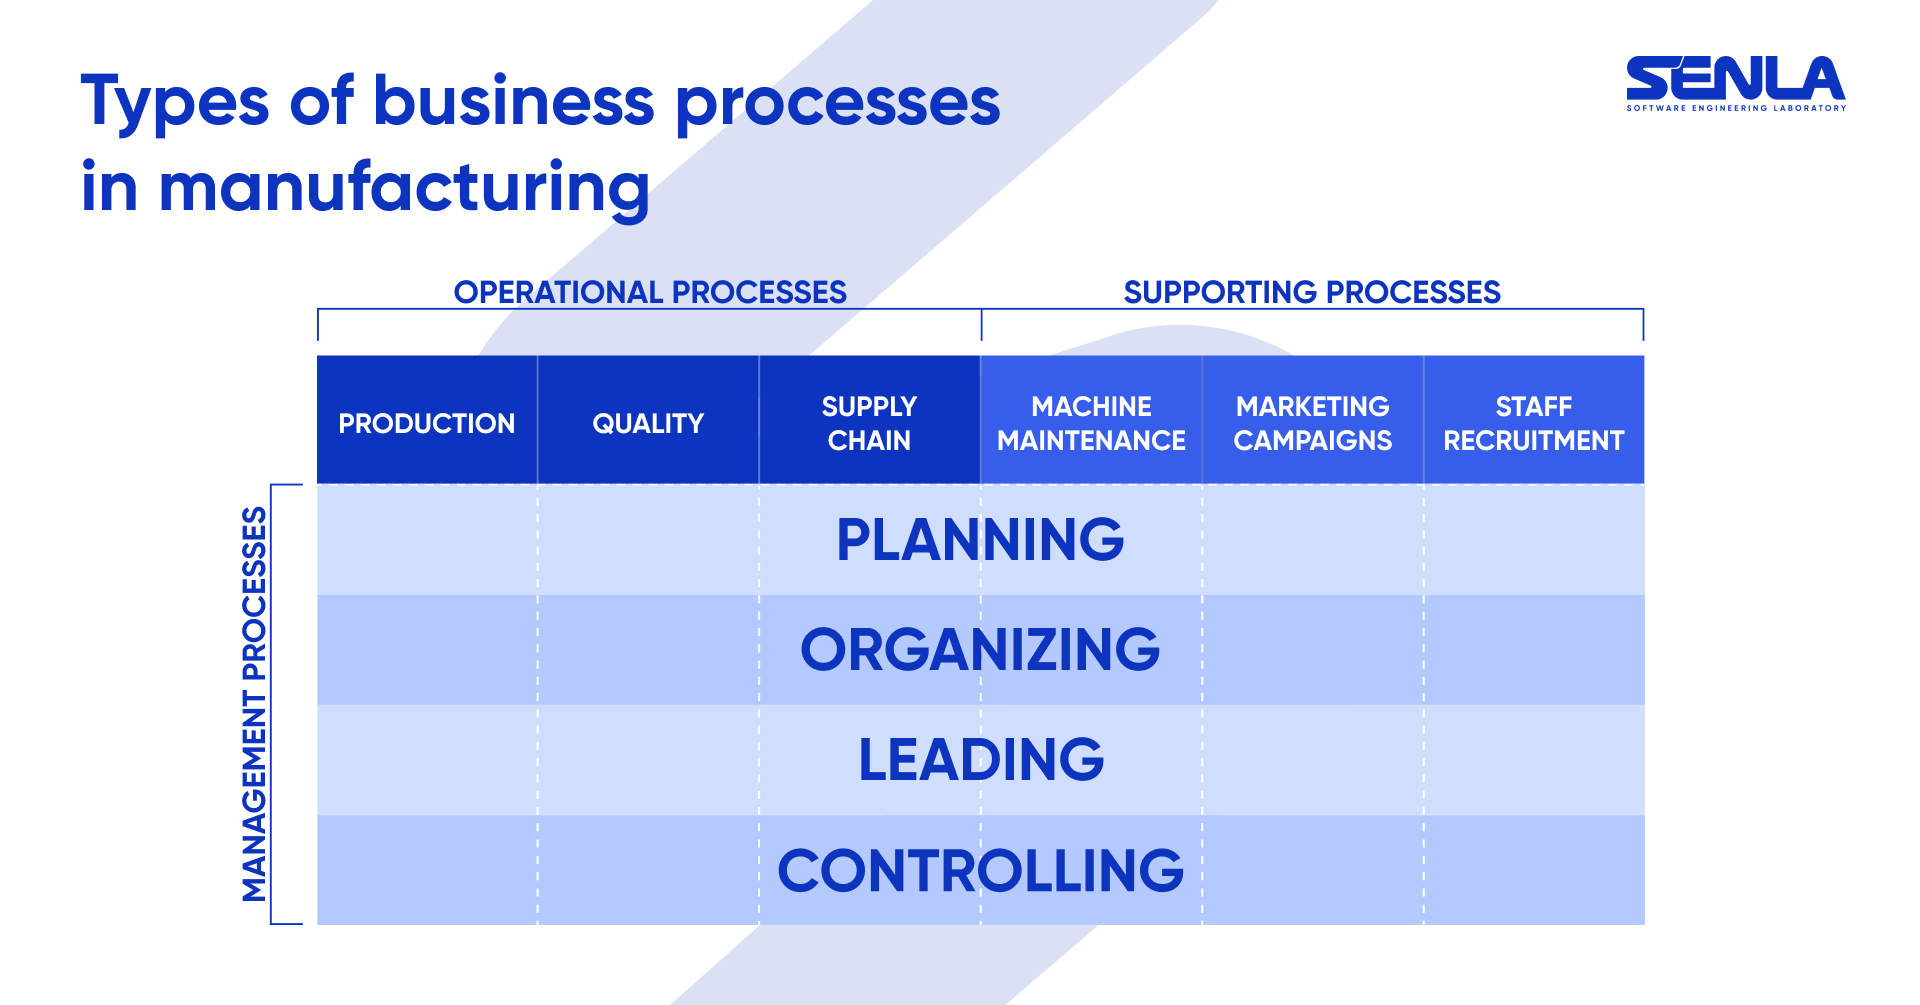 Types of business processes in manufacturing